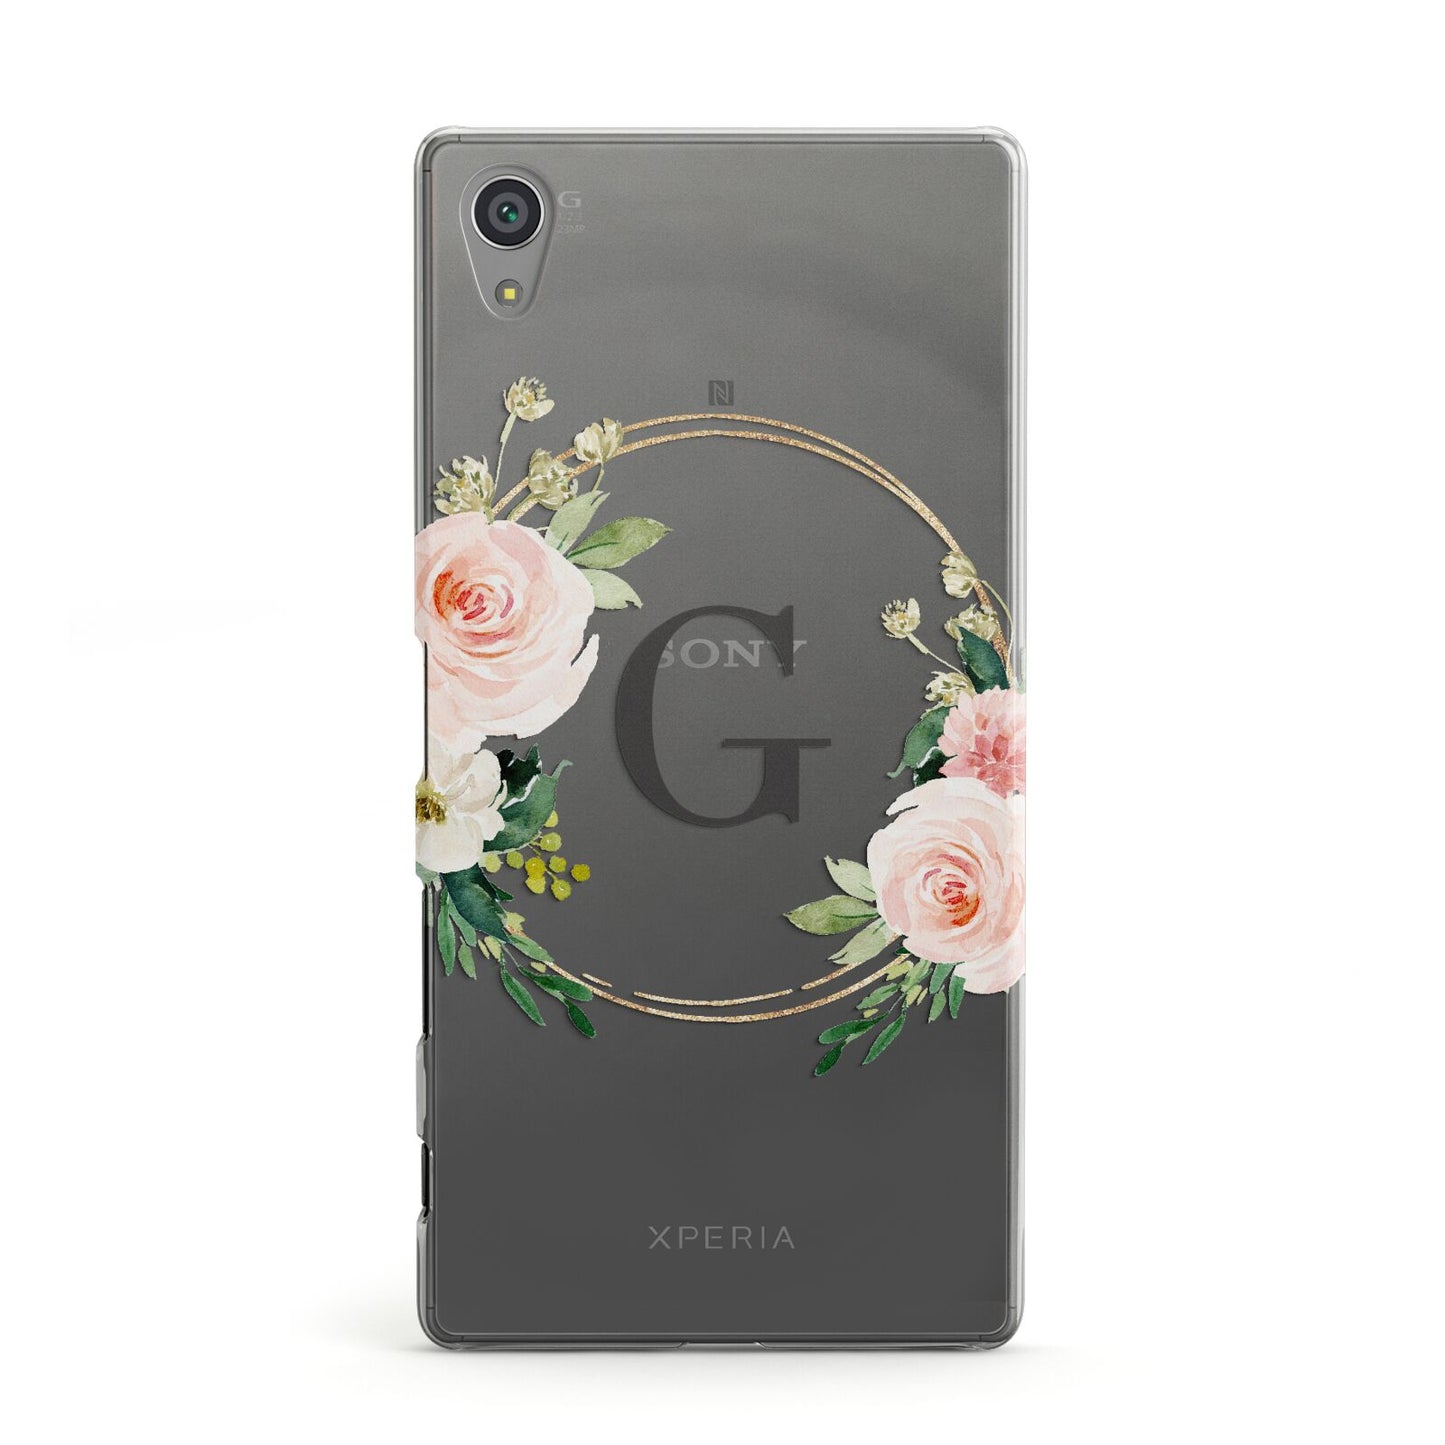 Personalised Blush Floral Wreath Sony Xperia Case